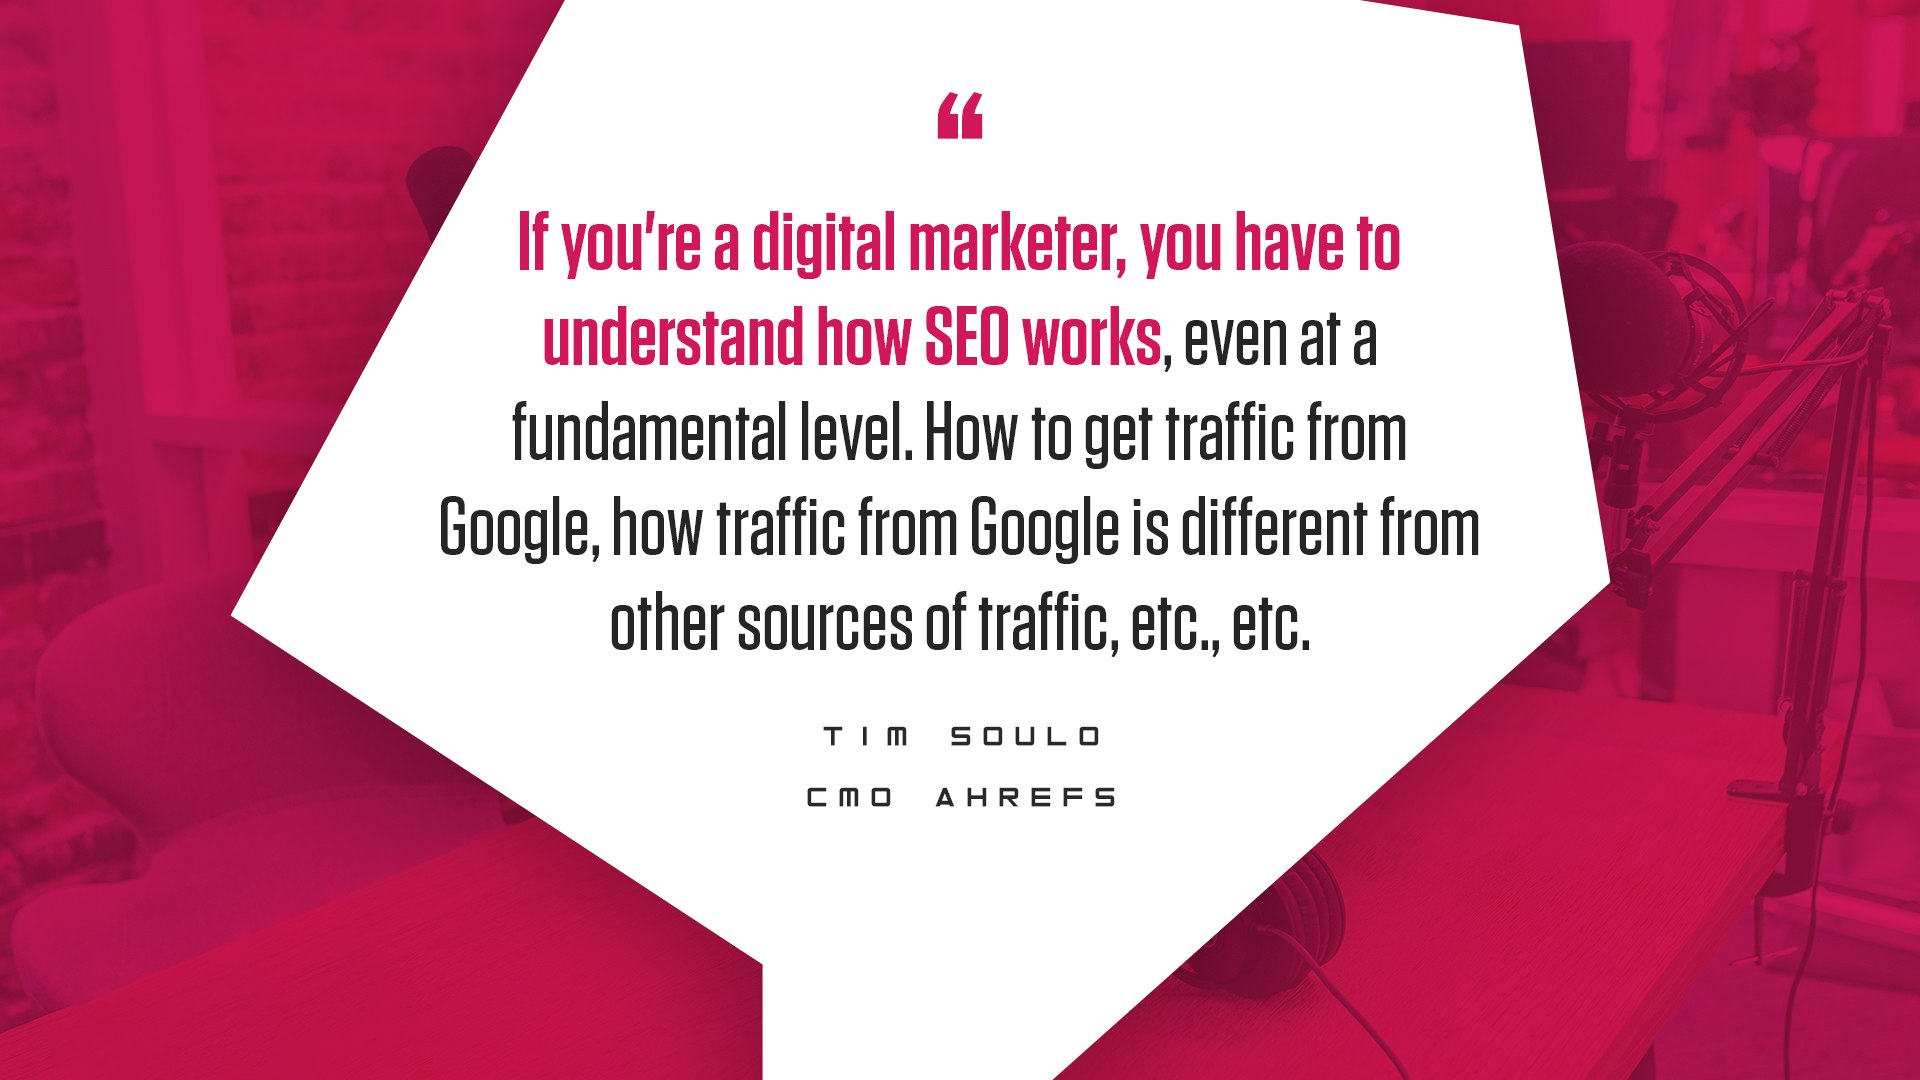 Digital Marketers Need to Understand SEO